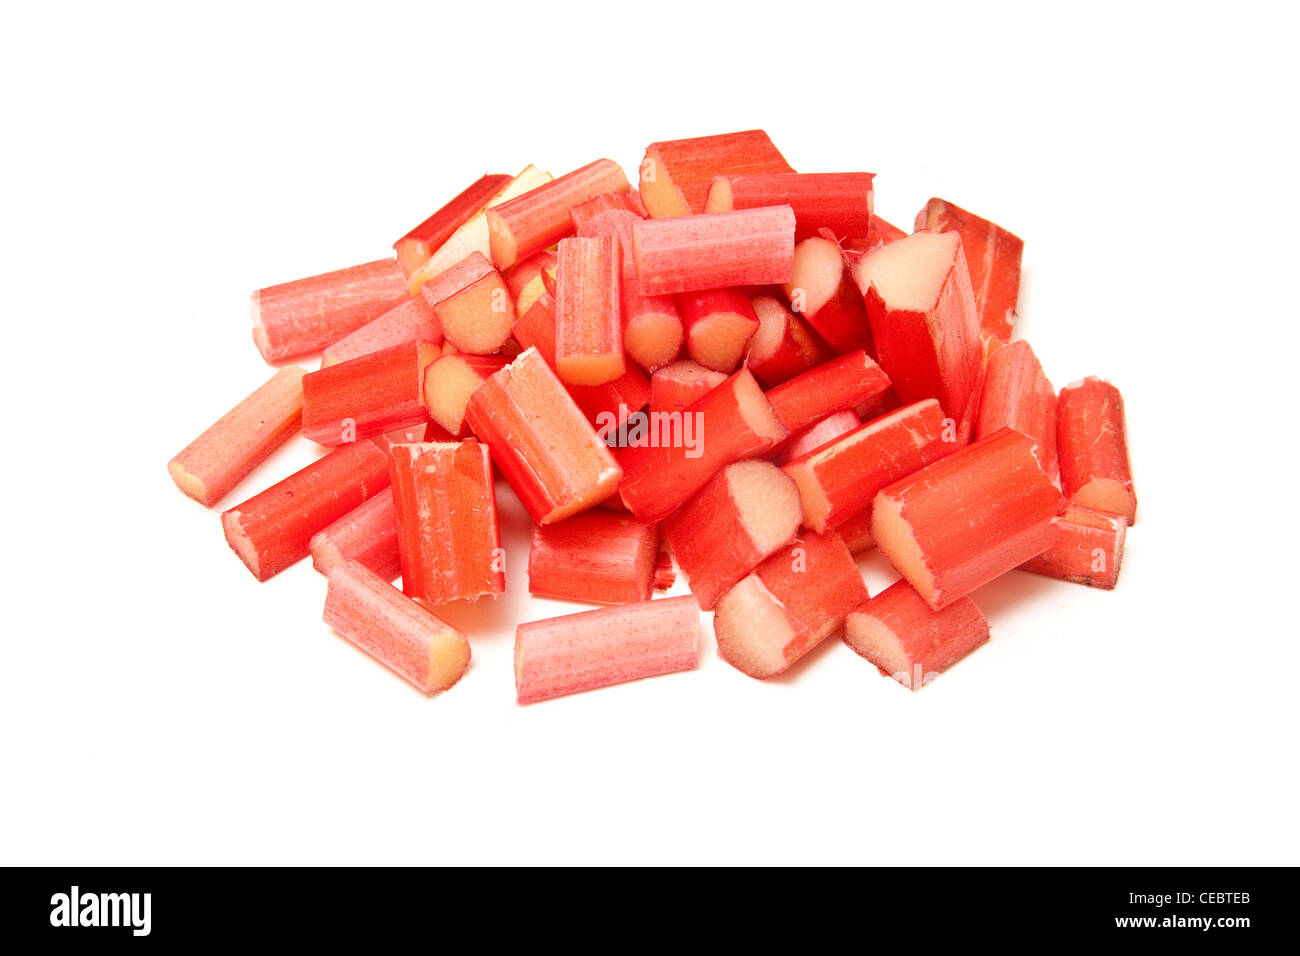 Rhubarb uncooked isolated on a white studio background. Stock Photo